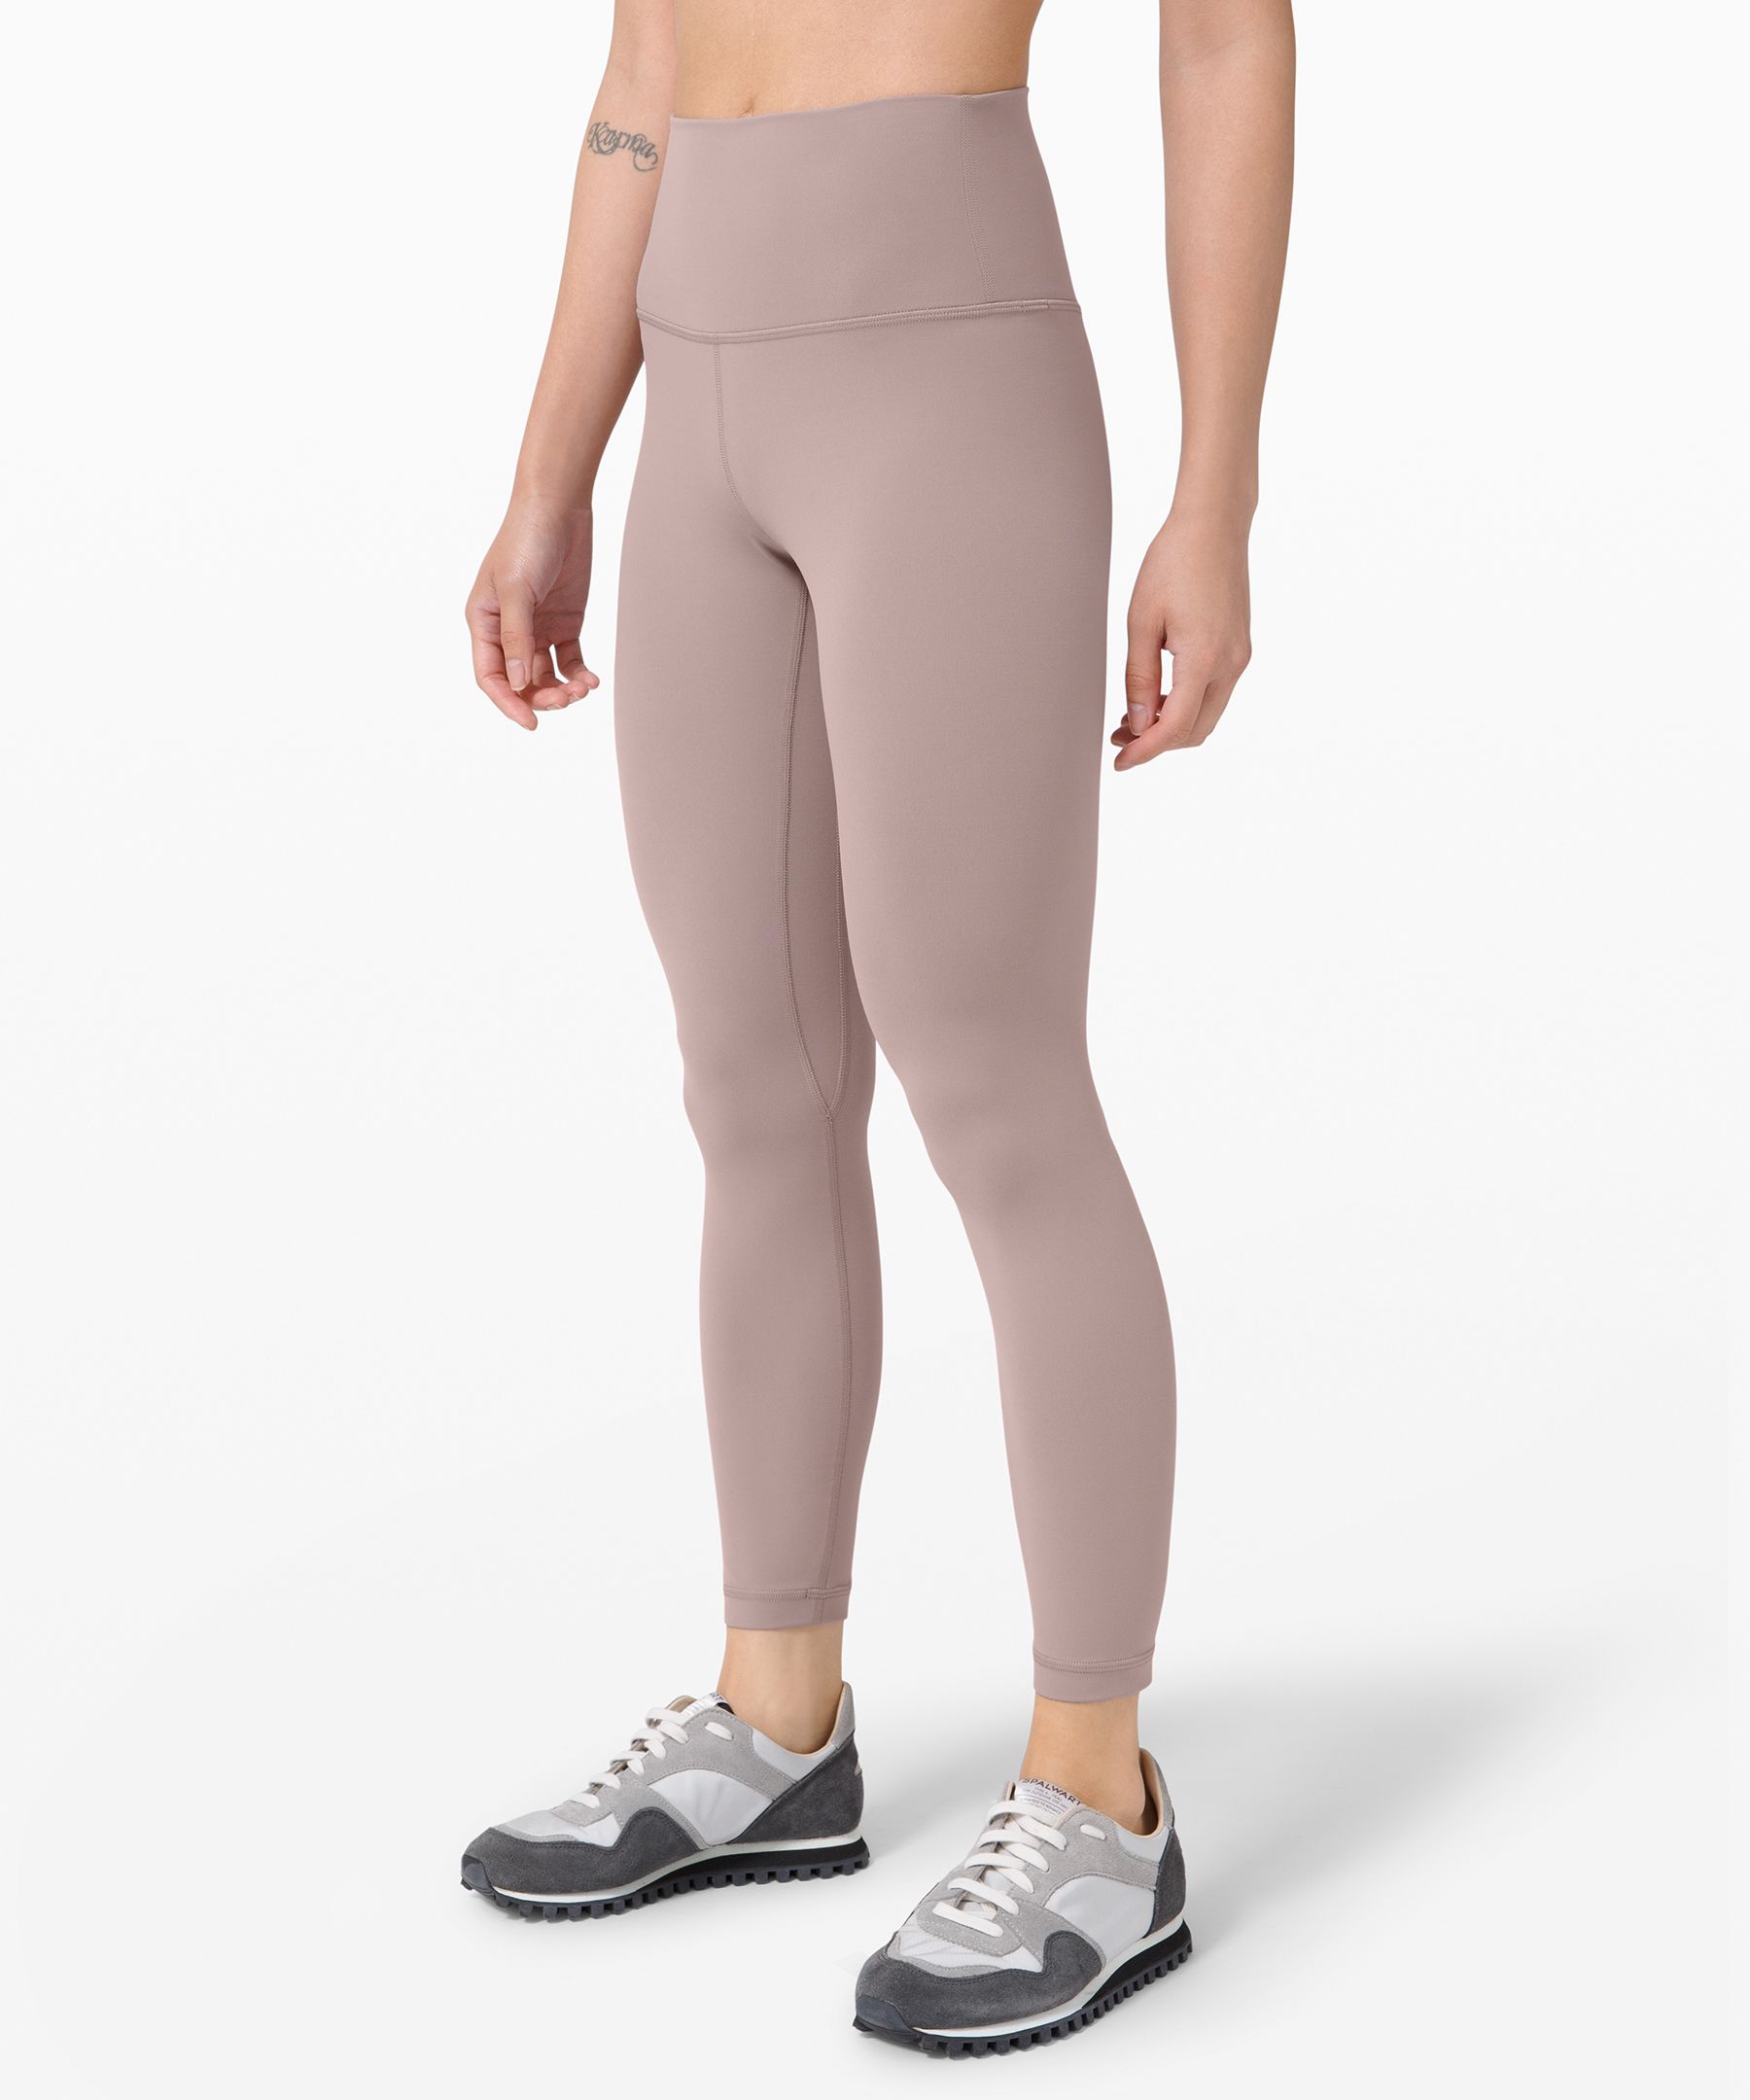 Instill Lunar Rock try on comparison - Asia fit *Should* be available  worldwide 🌎🌍 - So many us of have problems with the ankle gap 👎🏼  “Global” fit needs to be adjusted : r/lululemon